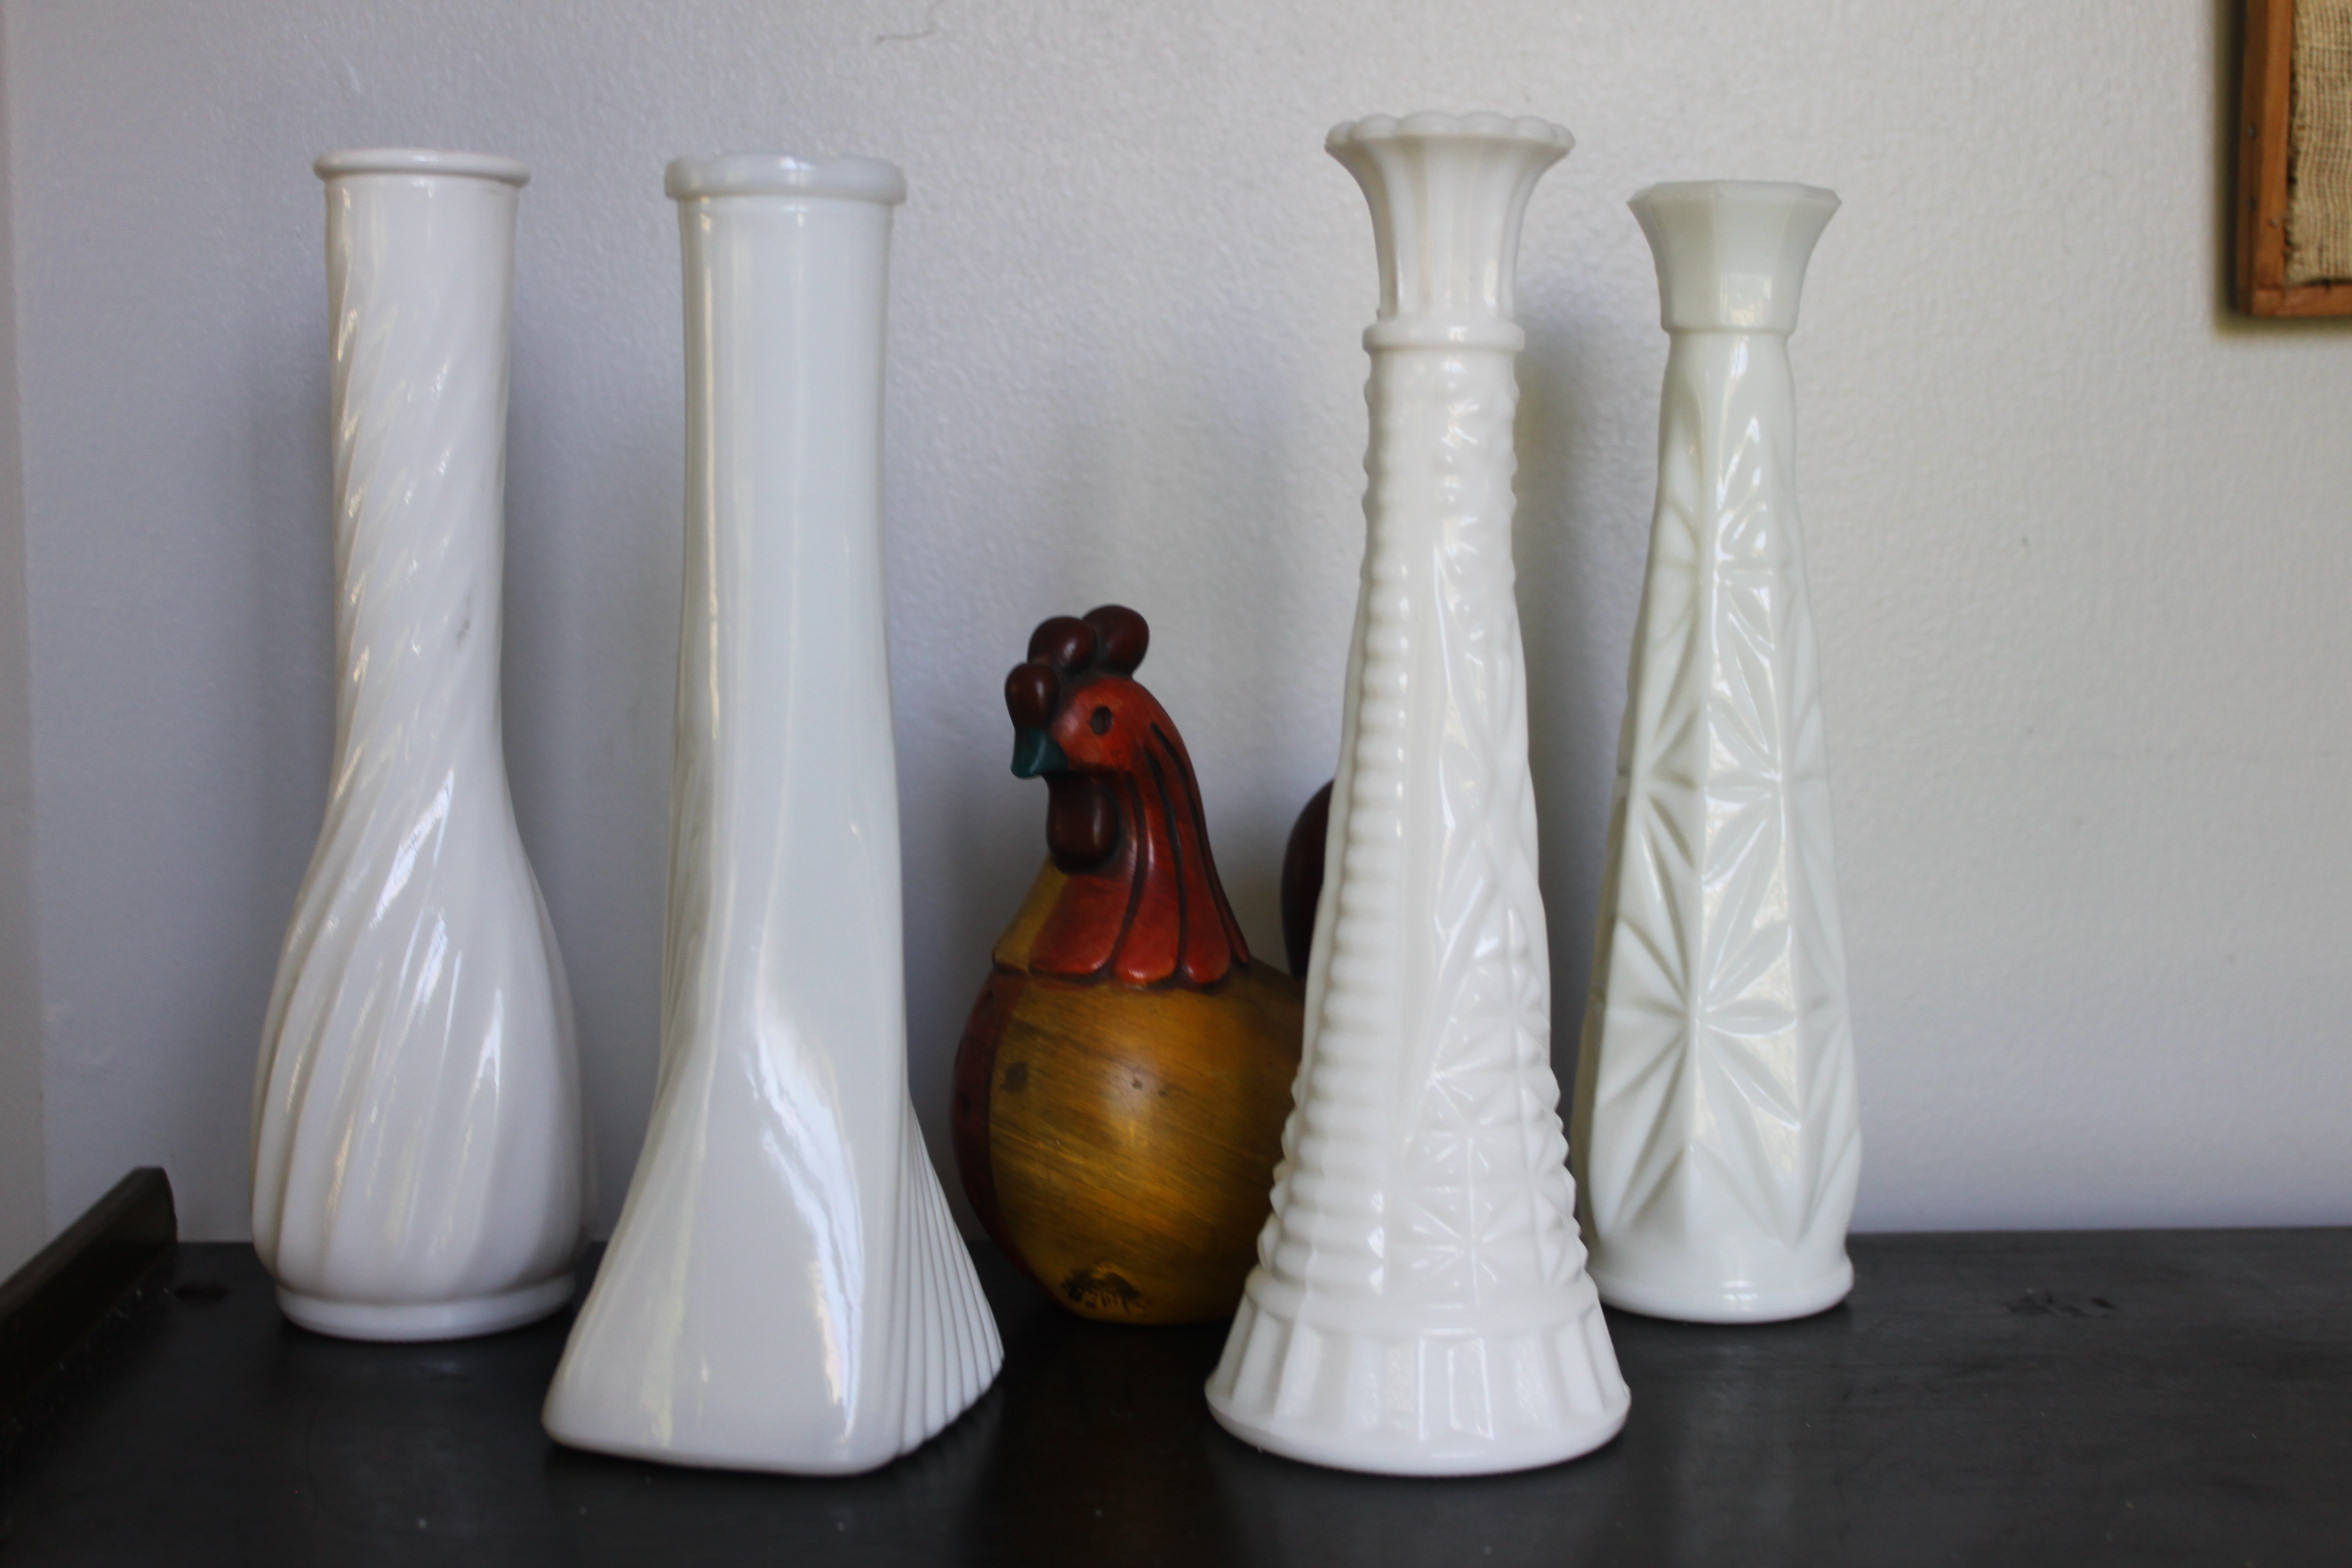 17 attractive Lead Crystal Bud Vase 2022 free download lead crystal bud vase of sleek set of 4 different styles set of beautiful milkglass throughout description set of 4 unique milk glass vases